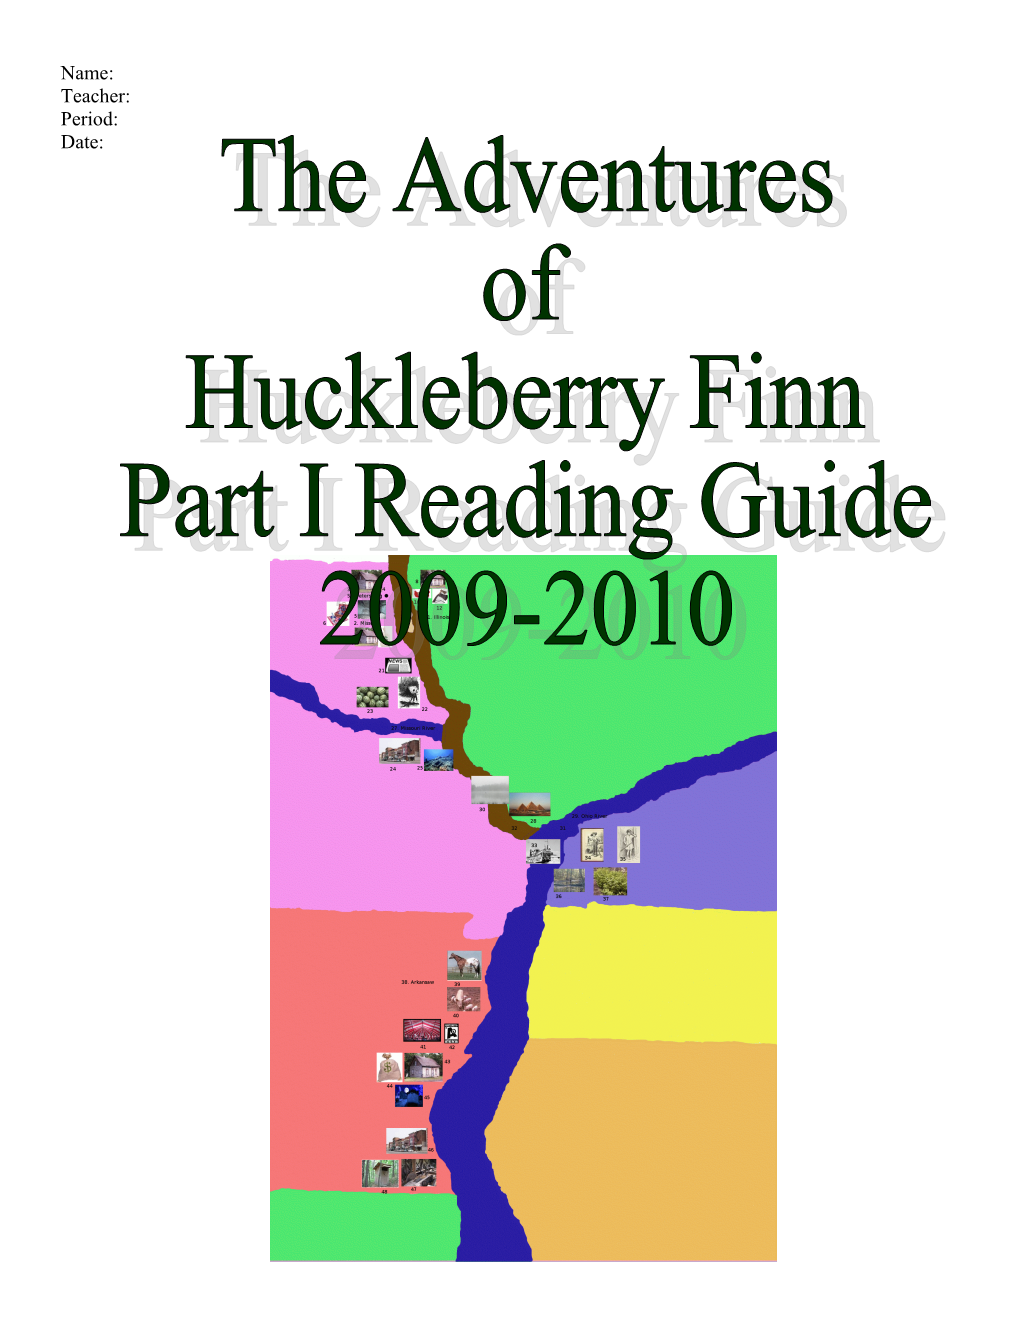 The Adventures of Huckleberry Finn Reading Guide Chapters 1-3